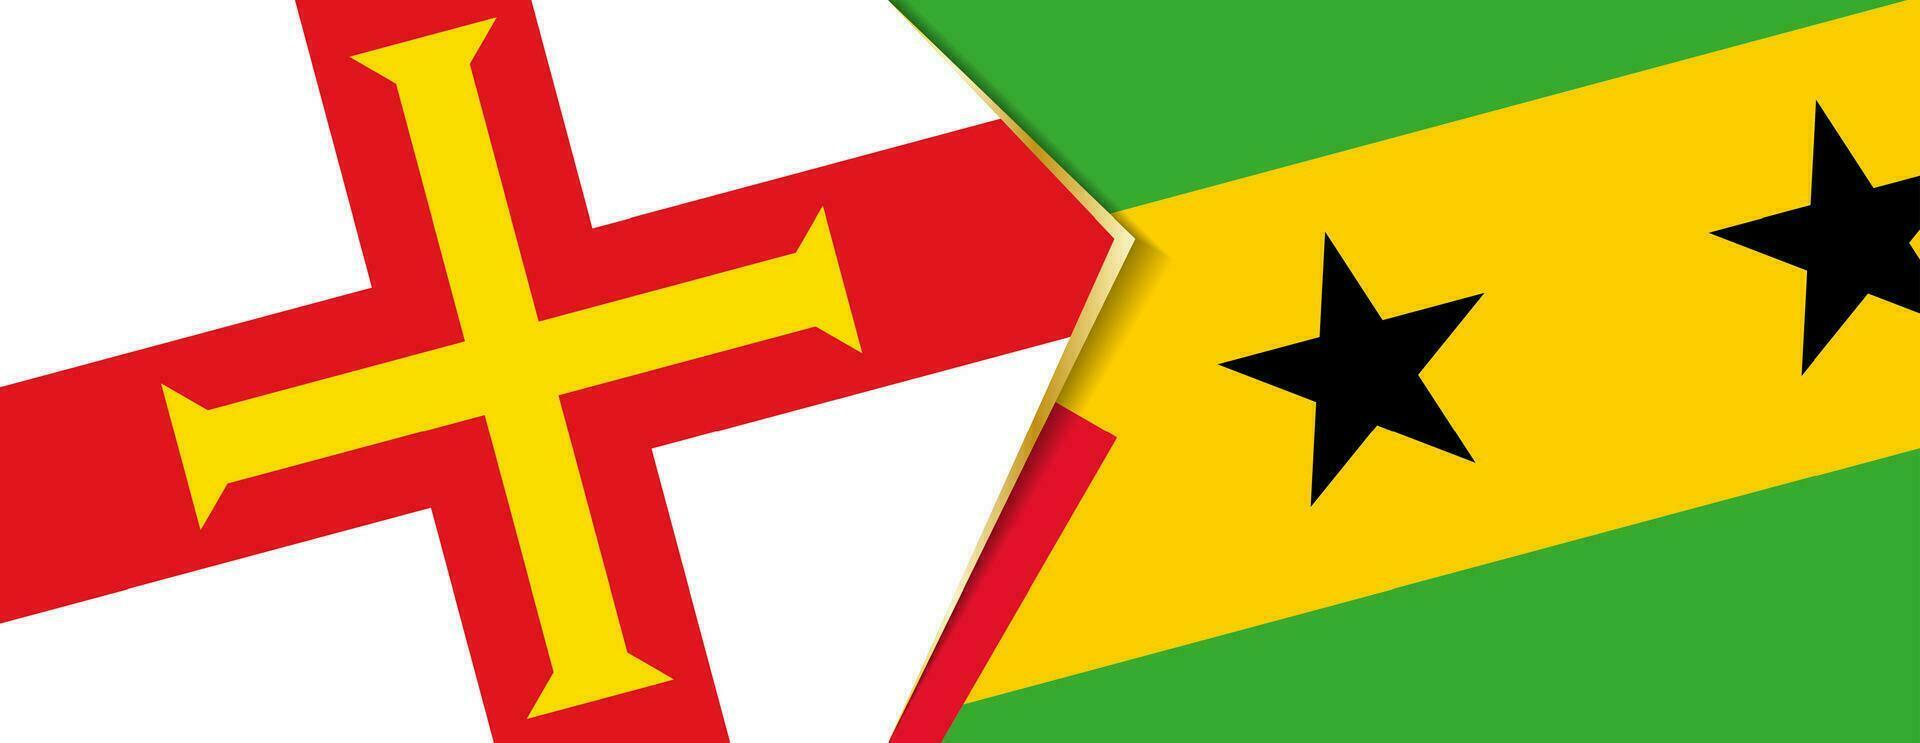 Guernsey and Sao Tome and Principe flags, two vector flags.